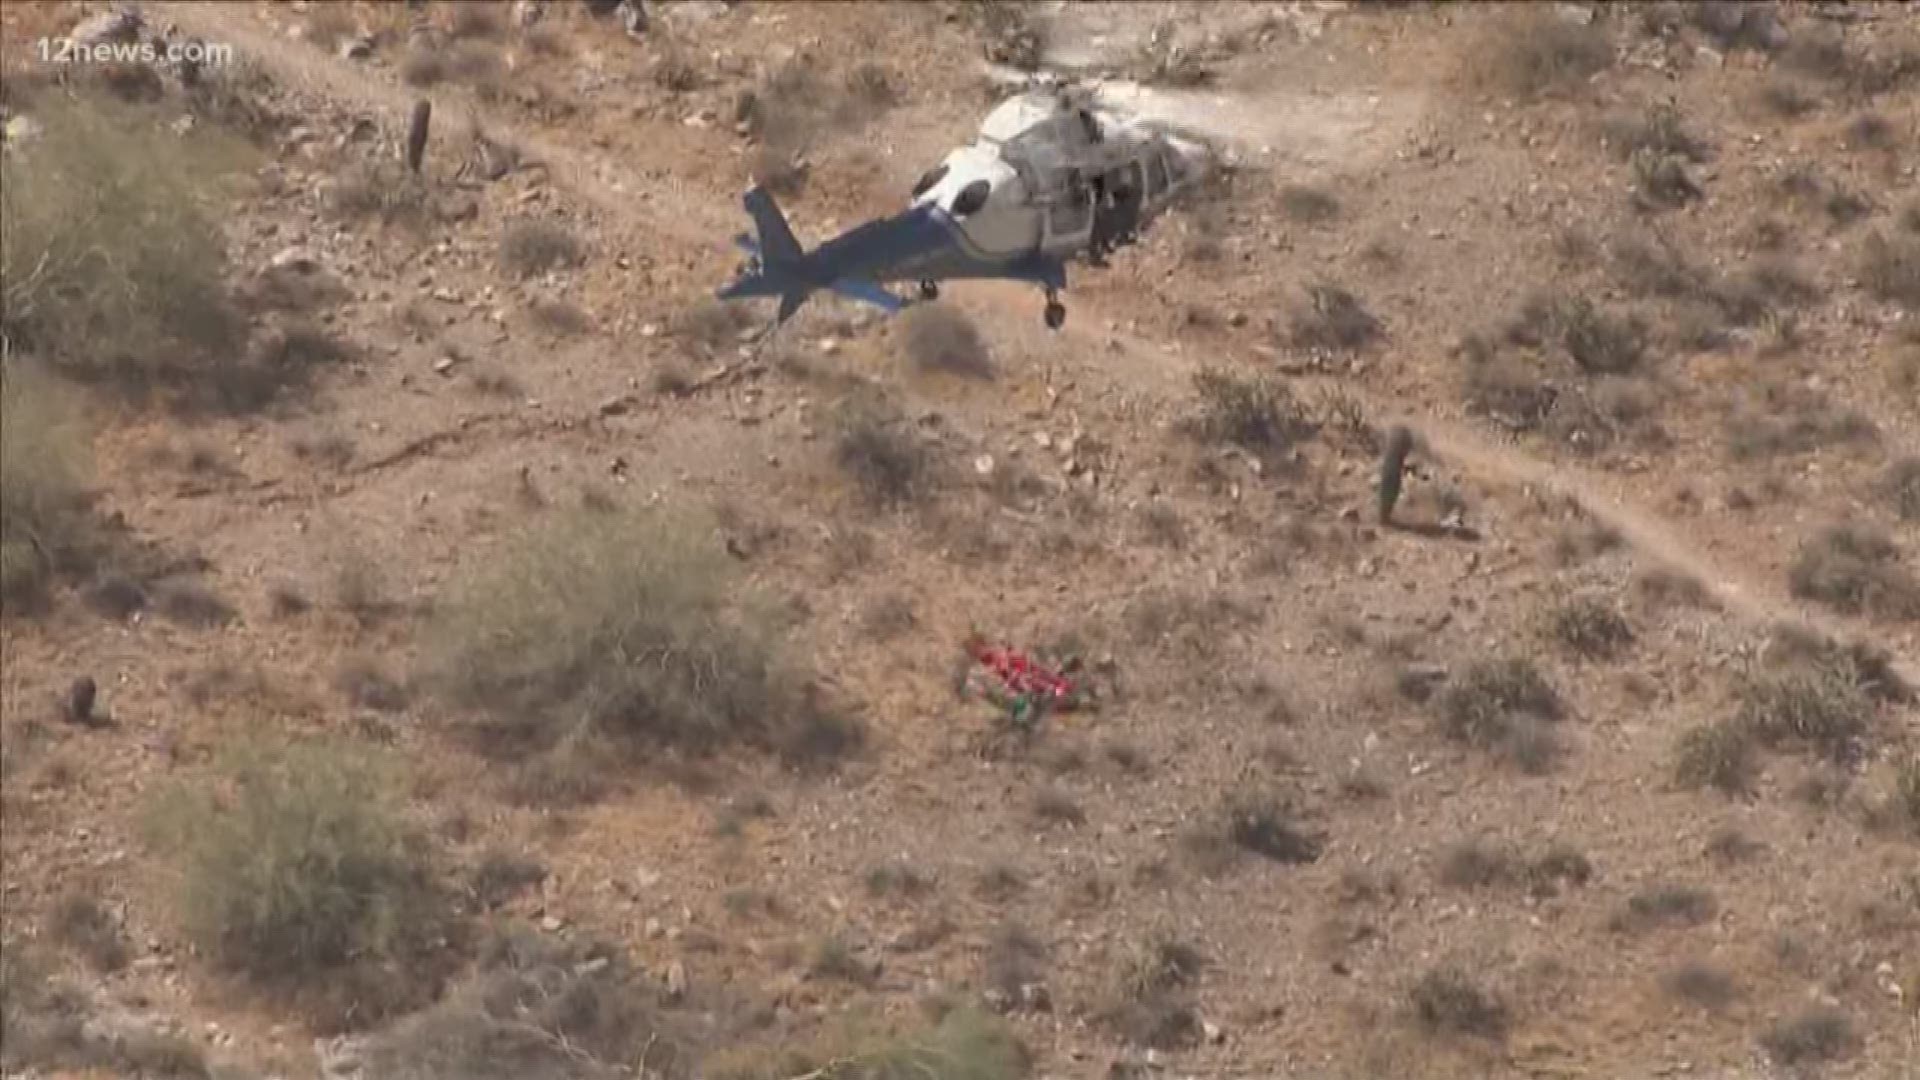 A 74-year-old woman who spun mid-air during a helicopter rescue off Piestewa Peak is still dizzy three days later. A local doctor says the effects from the spinning can be more detrimental than anyone may realize.